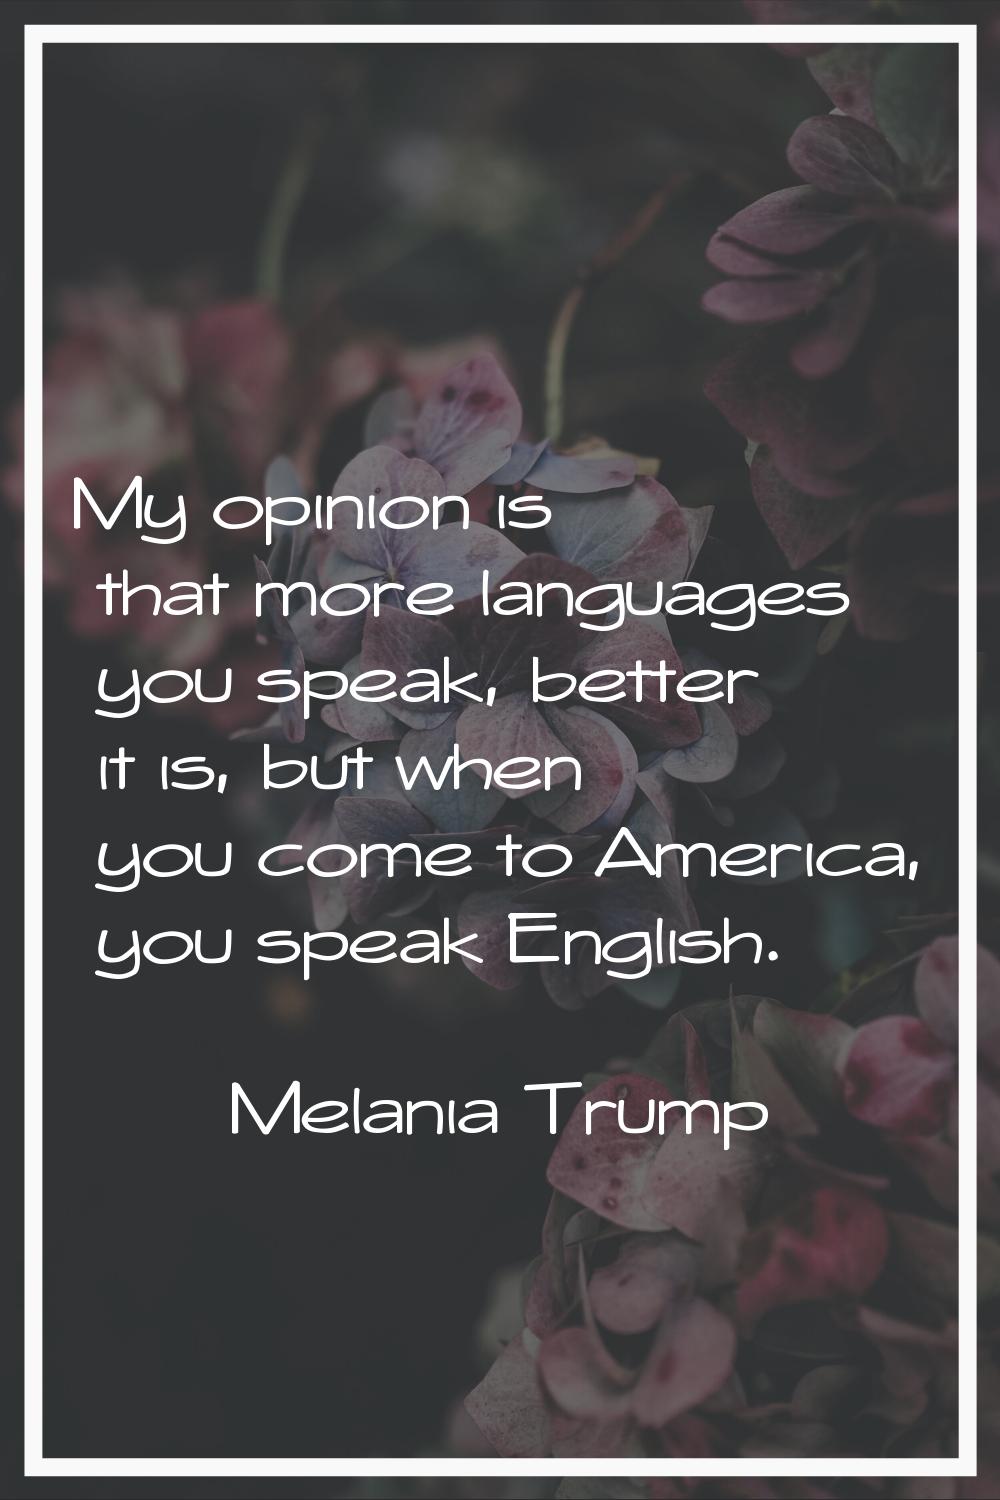 My opinion is that more languages you speak, better it is, but when you come to America, you speak 